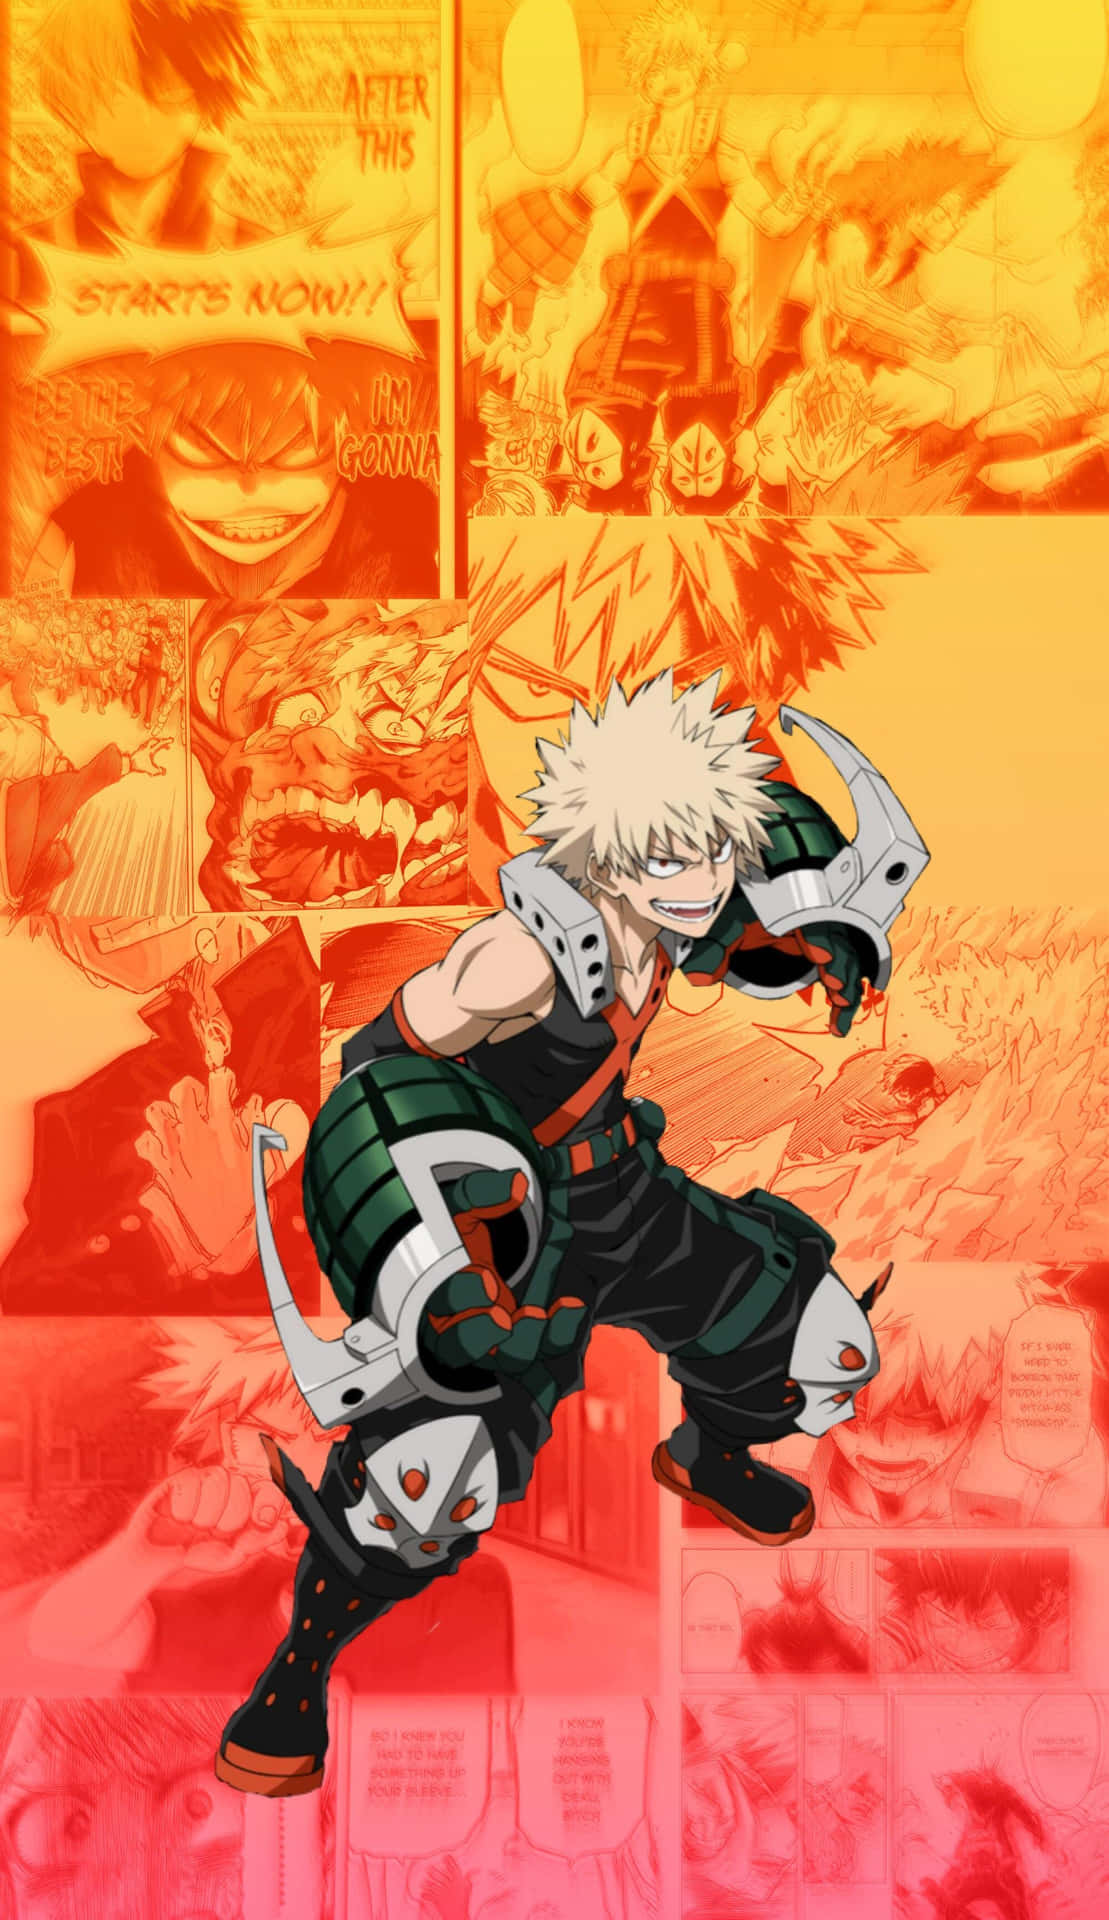 Bakugoumed En Intensiv Uttryck Och Attityd 🔥 (note: The Translation Is Accurate, But In Swedish It Is Not Common To Use Emojis Or Emoticons In Text. The Context In Which The Sentence Is Used May Suggest The Use Of A Specific Wallpaper Featuring Bakugou.) Wallpaper